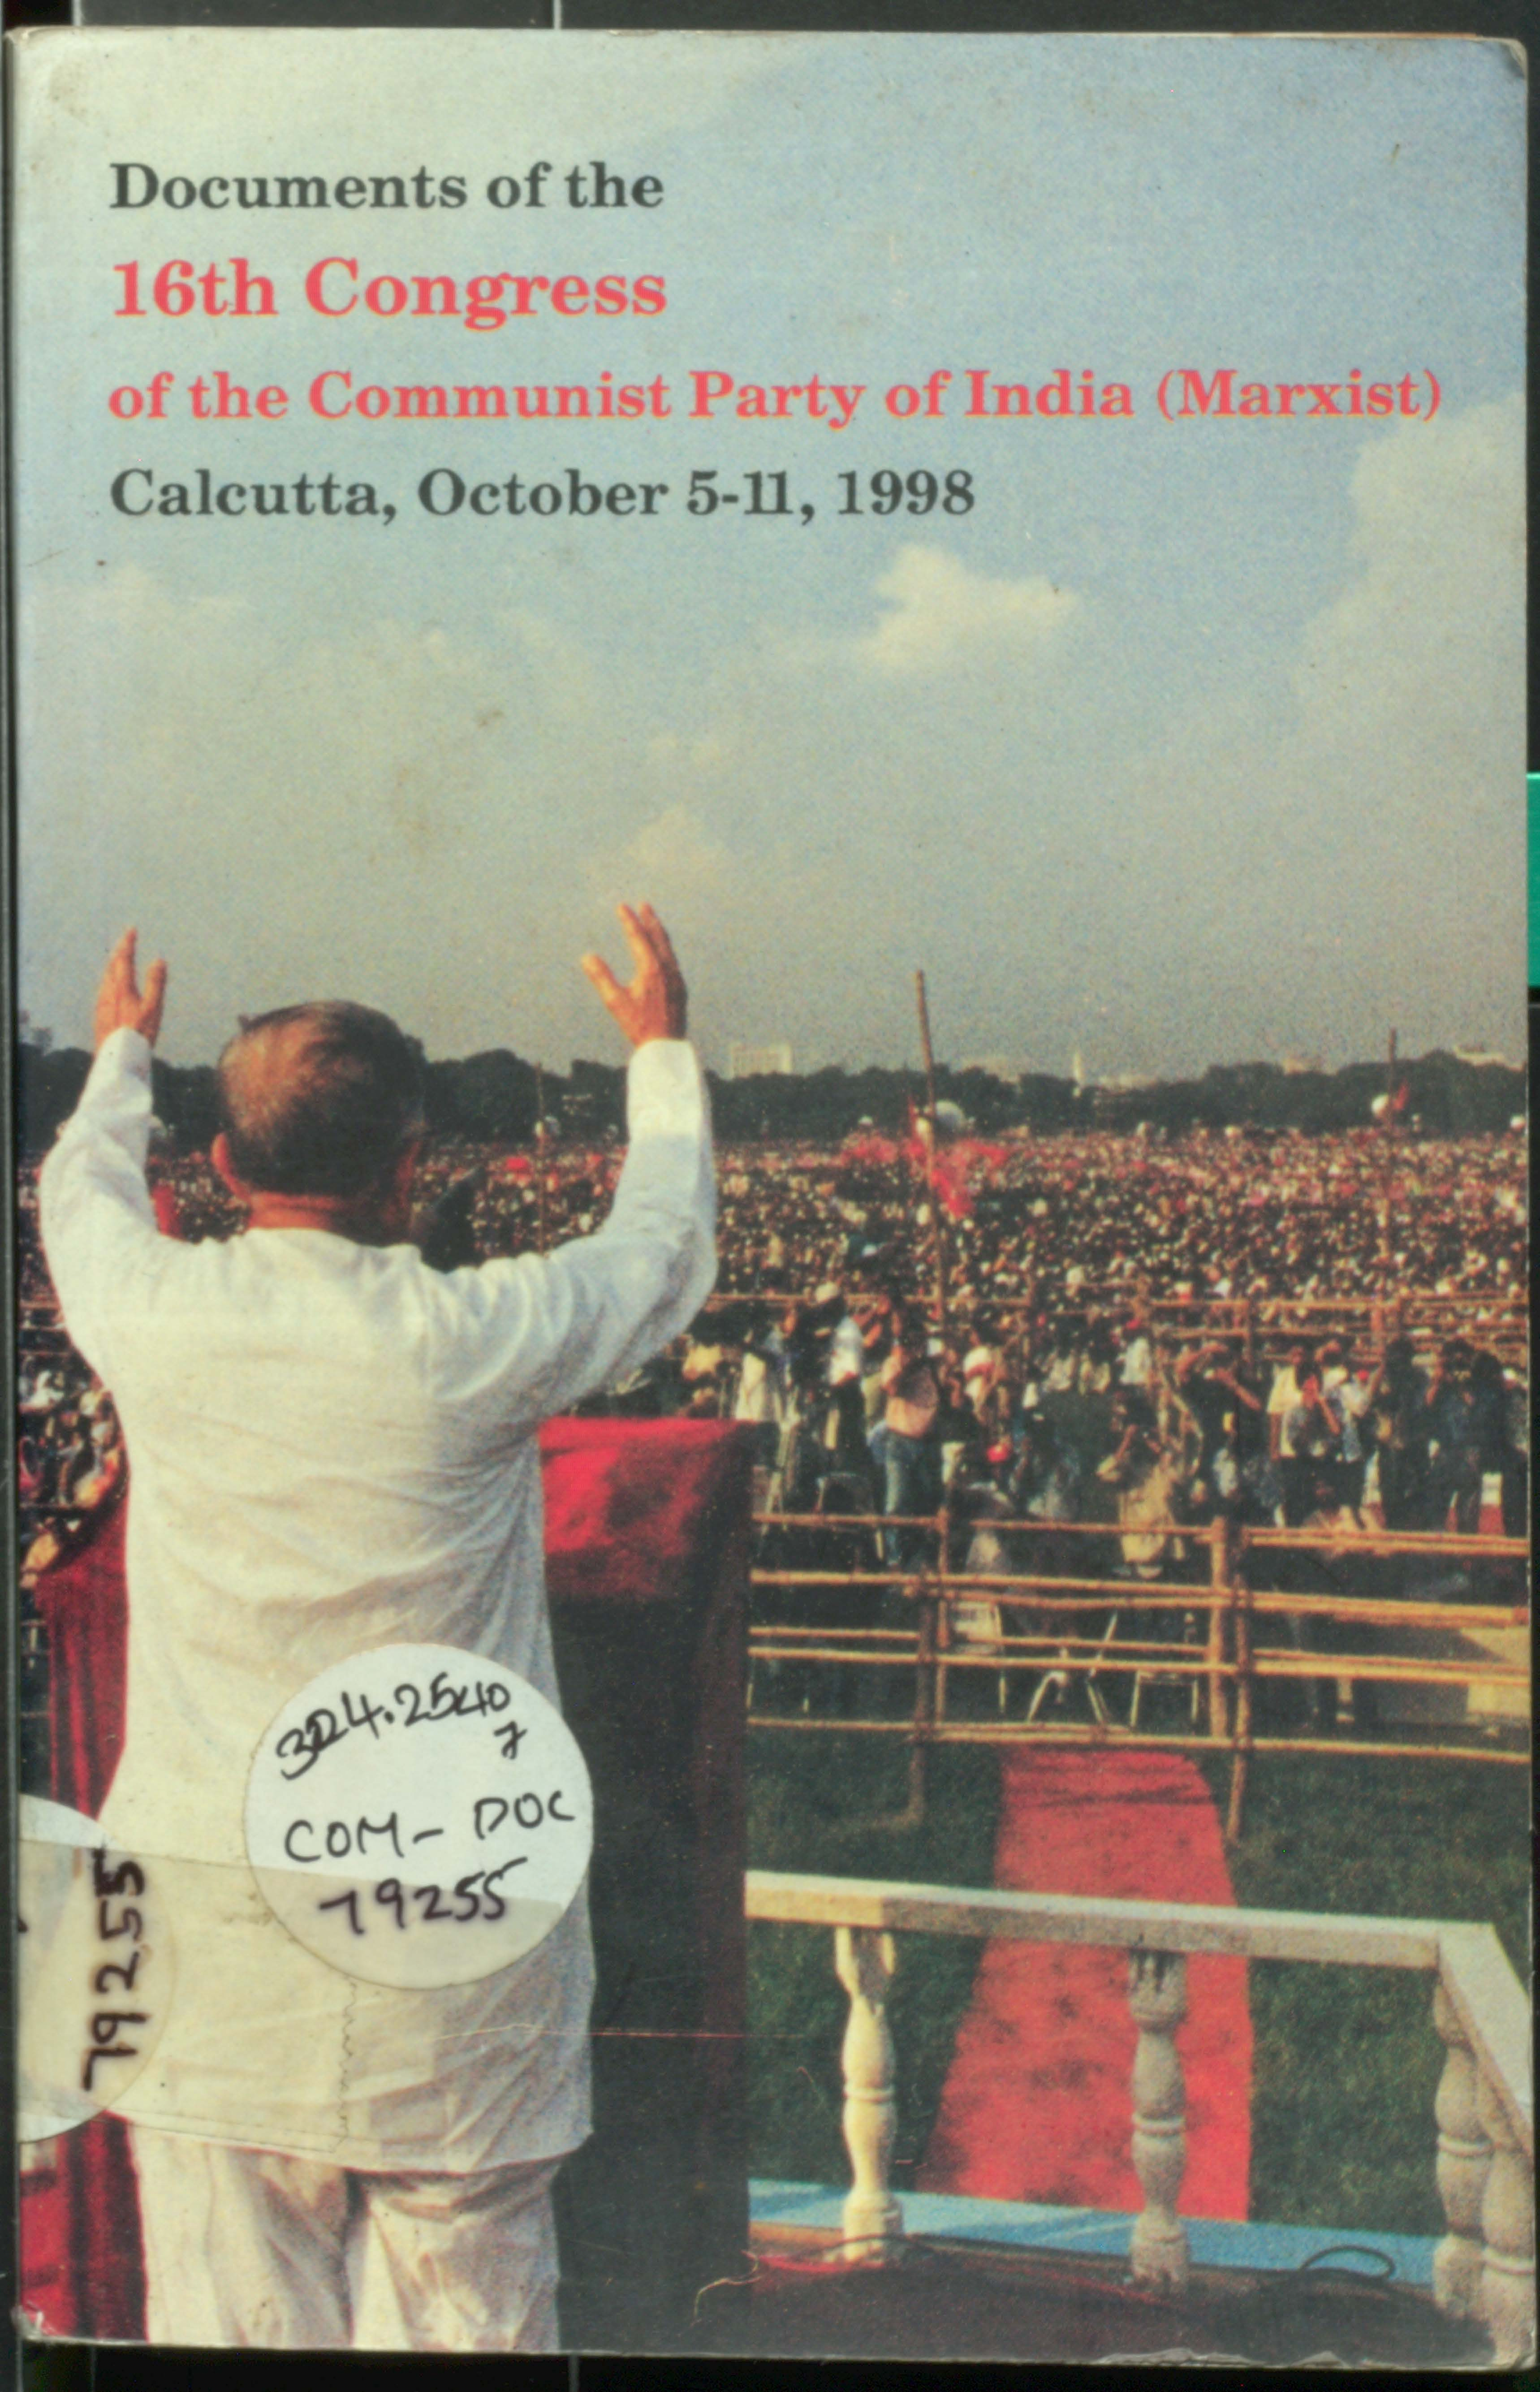 DOCUMENTS OF THE 16 TH CONGRESS OF THE COMMUNIST PARTY OF INDIA (MARXIST) CALCUTTA, OCTOBER 5-11,1998